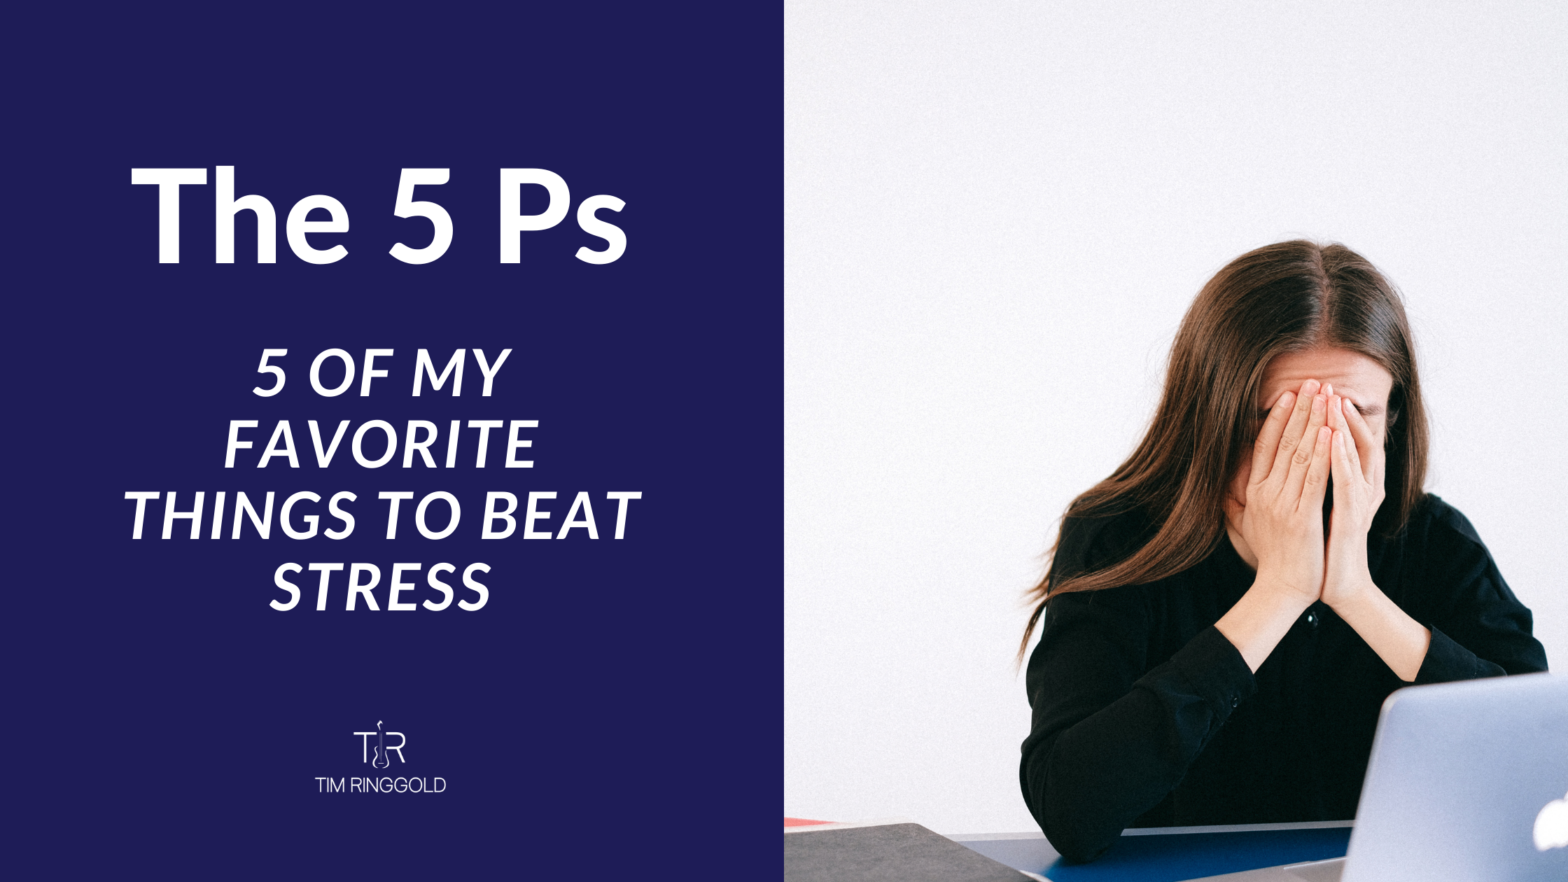 The 5 Ps: 5 Of My Favorite Things to Beat Stress